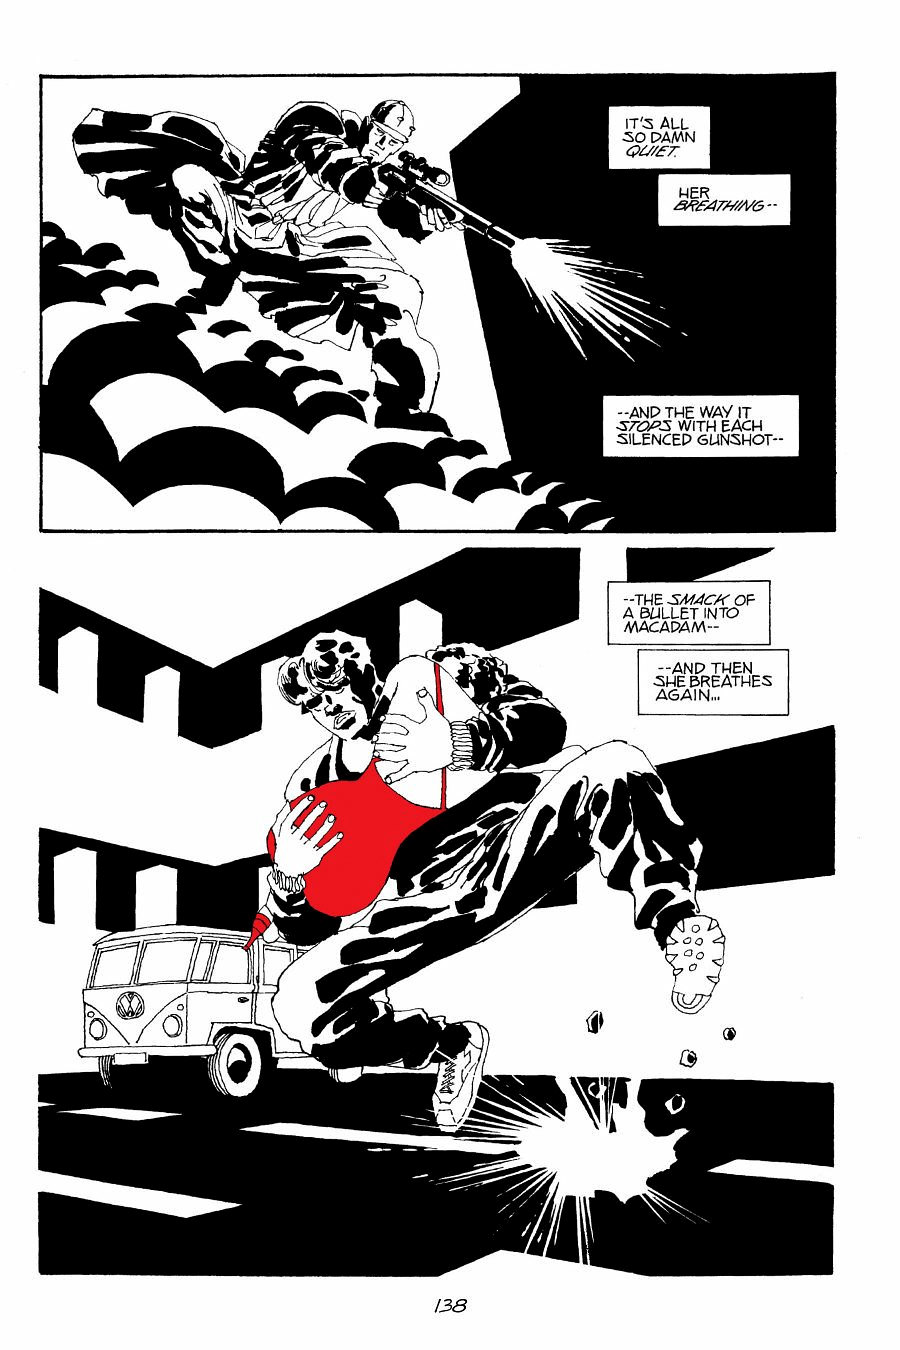 page 138 of sin city 6 booze broads and bullets